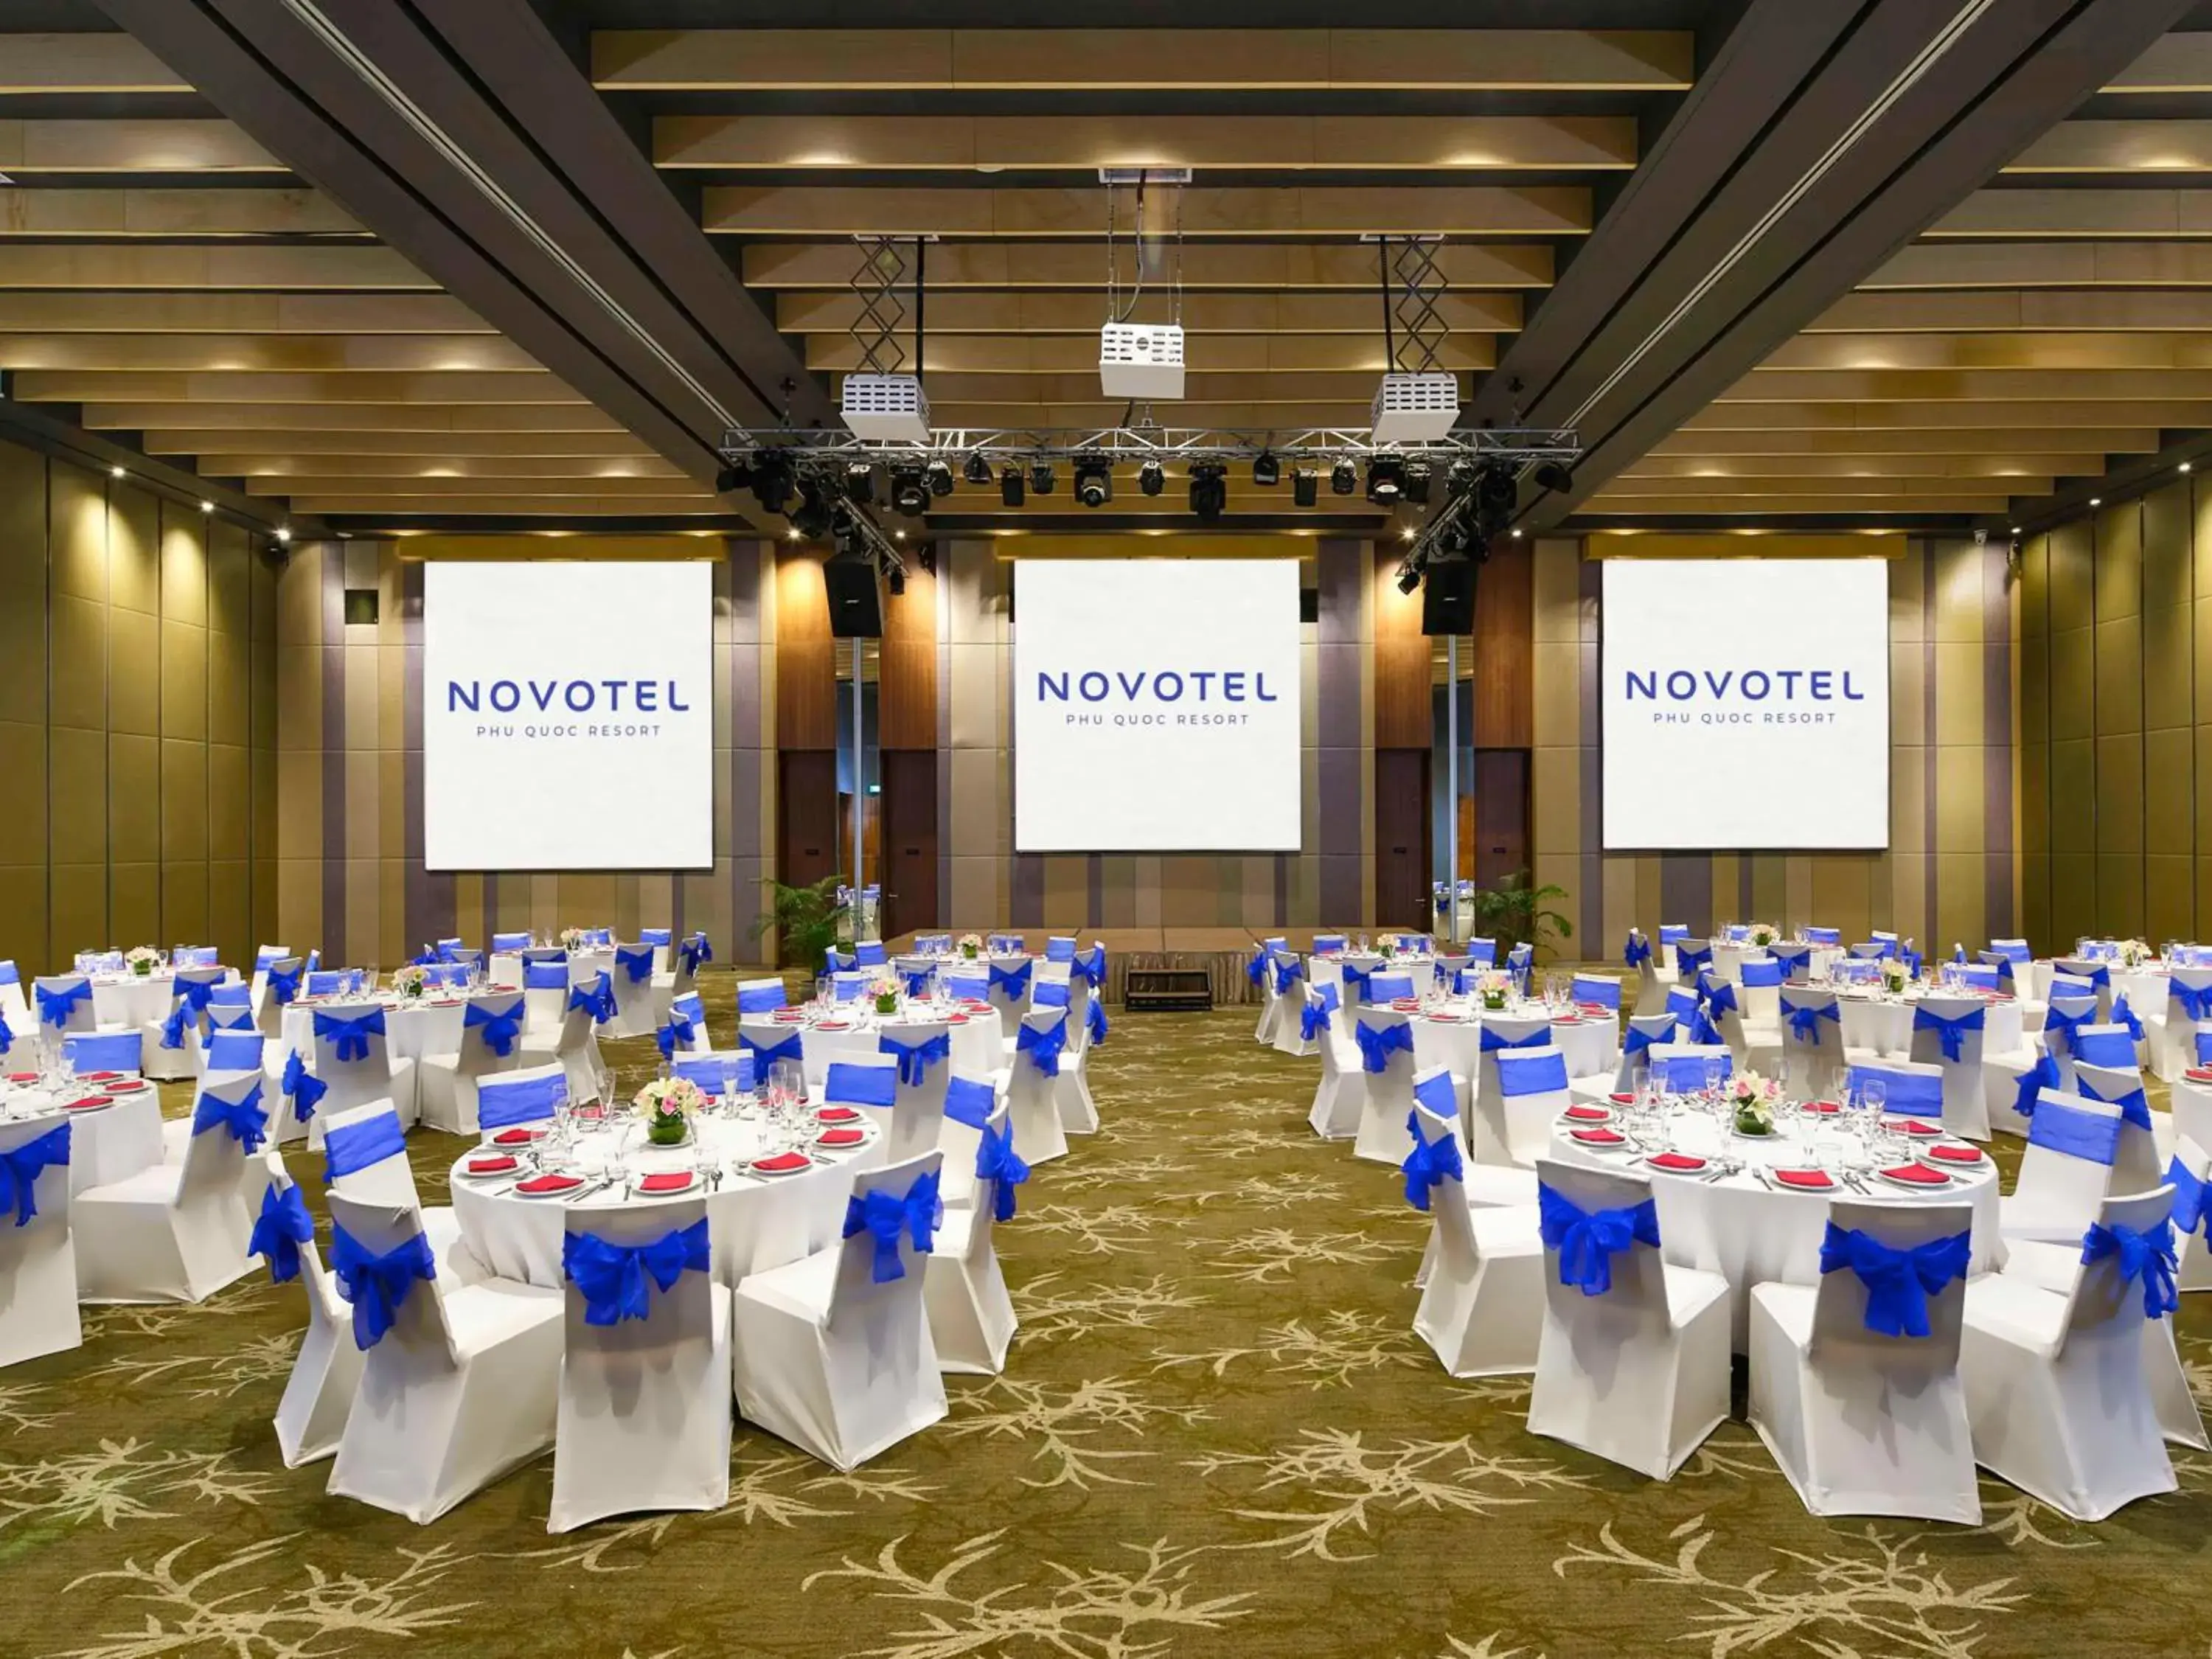 Meeting/conference room, Banquet Facilities in Novotel Phu Quoc Resort